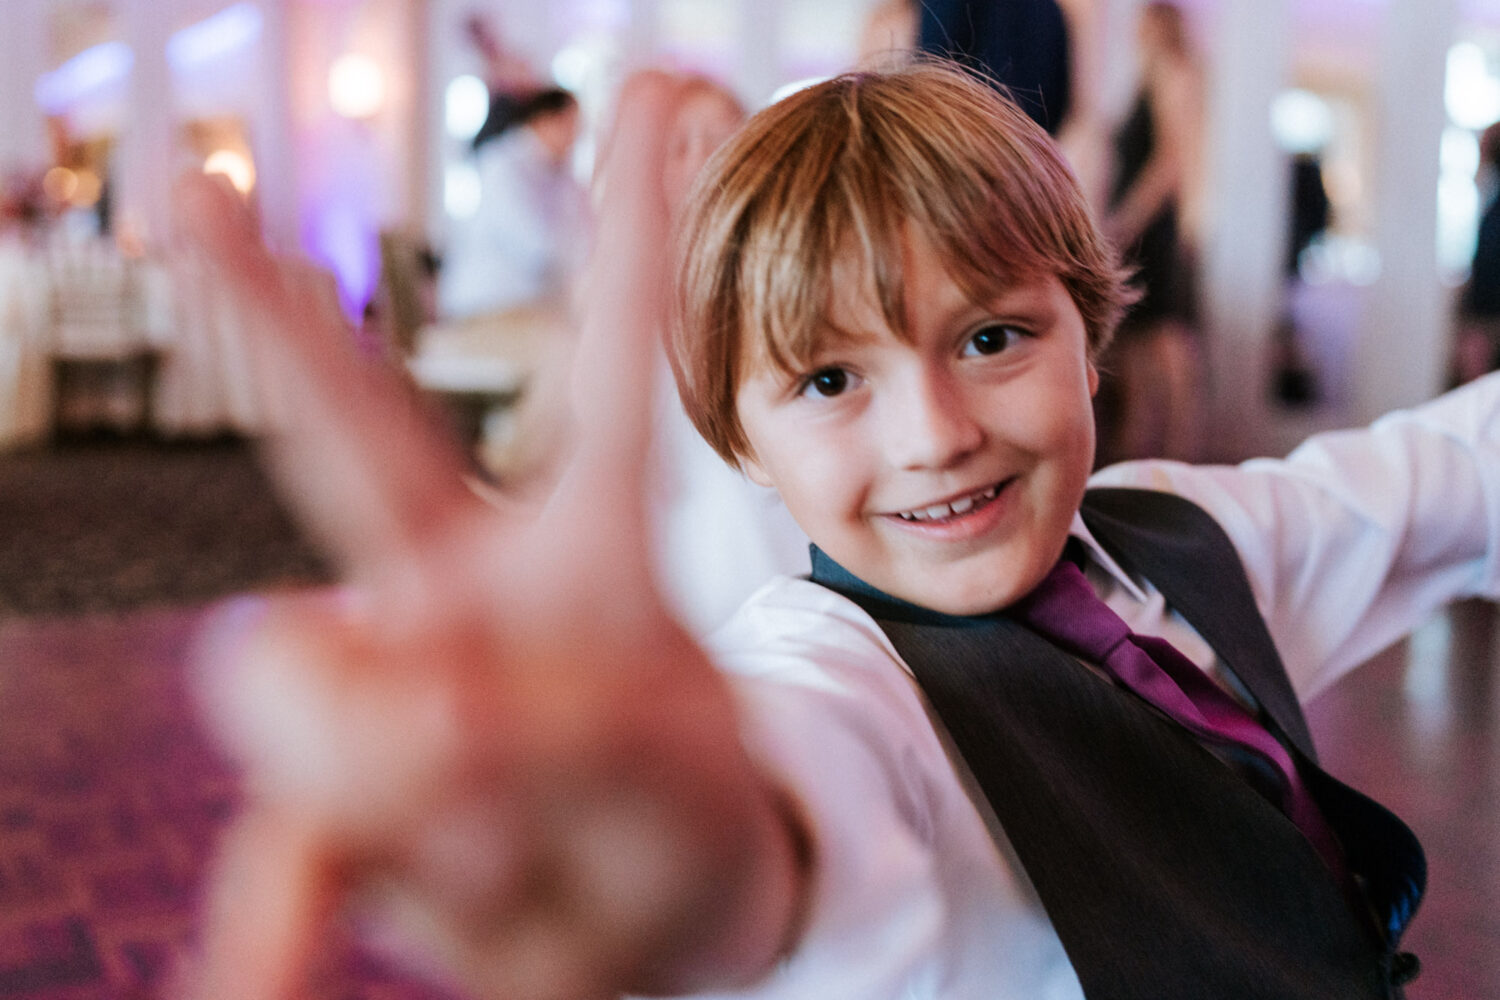 young boy dancing and waiving a peace hand sign to the camera during wedding reception